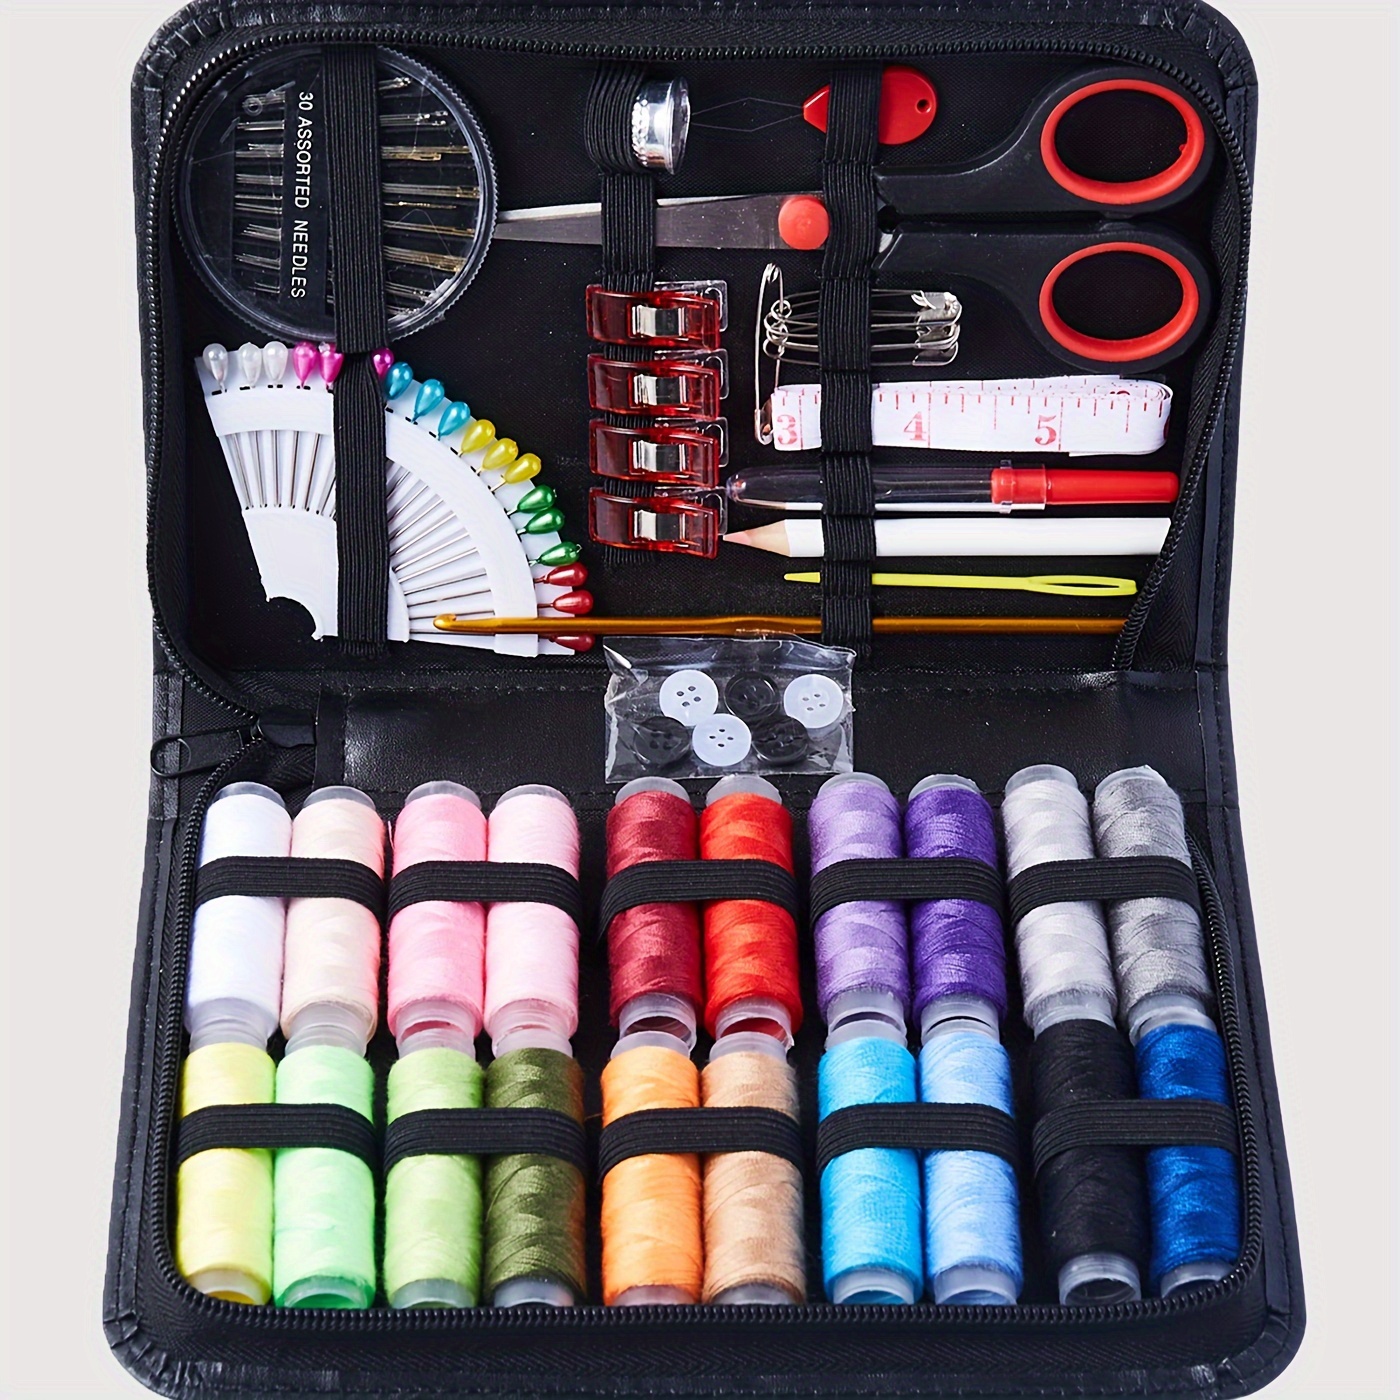 

Compact Travel Sewing Kit With 54/98 Pieces - Includes 20 Assorted Colors Of Thread, Needles, And Essential Sewing Accessories In A Portable Pu Case For Quick Repairs